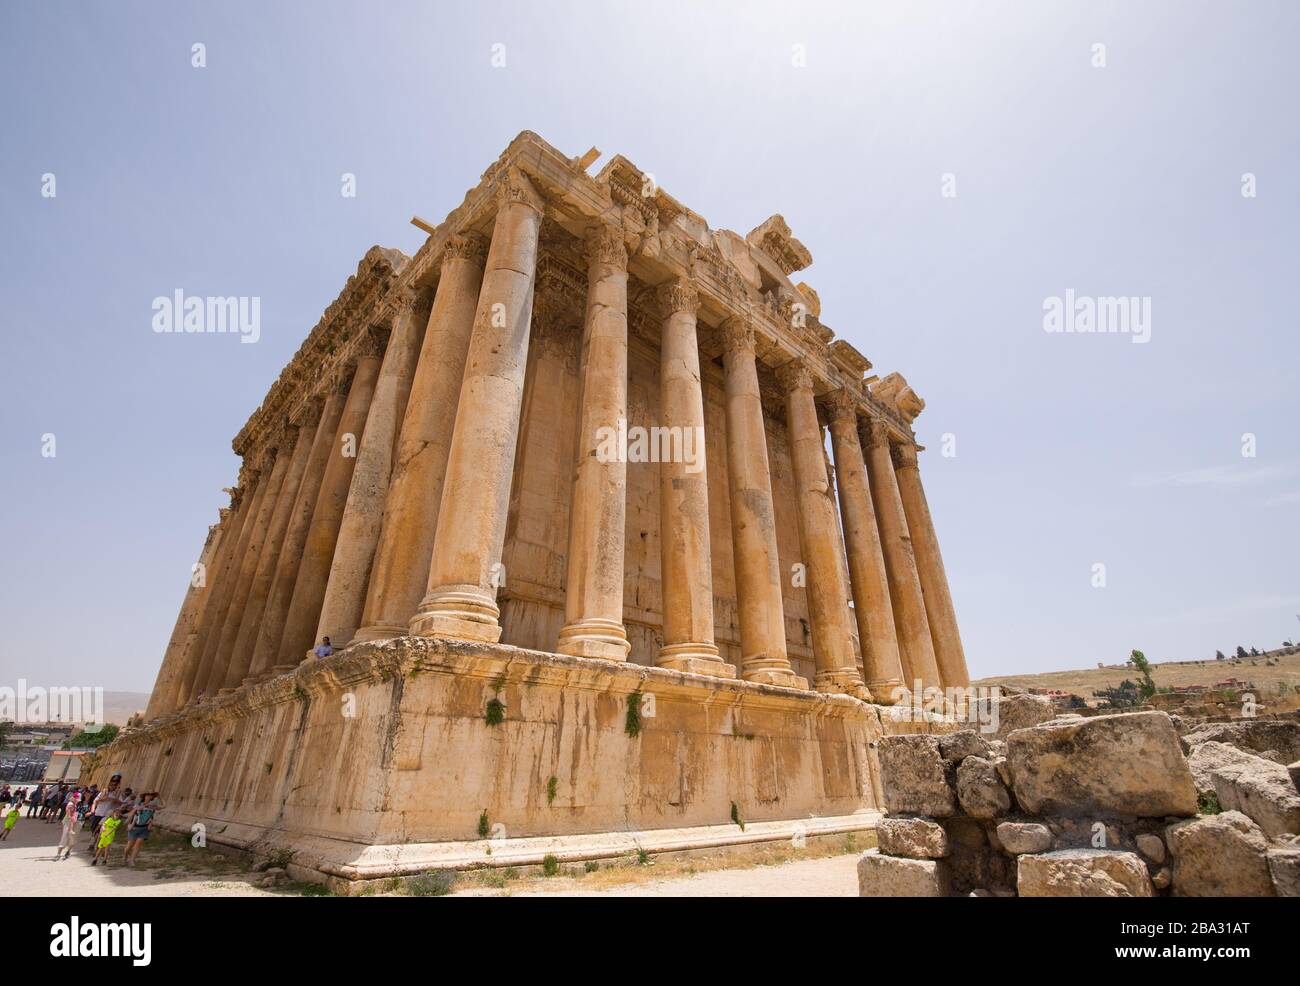 Temple of Bacchus. The ruins of the Roman city of Heliopolis or Baalbek in the Beqaa Valley. Baalbek, Lebanon - June, 2019 Stock Photo